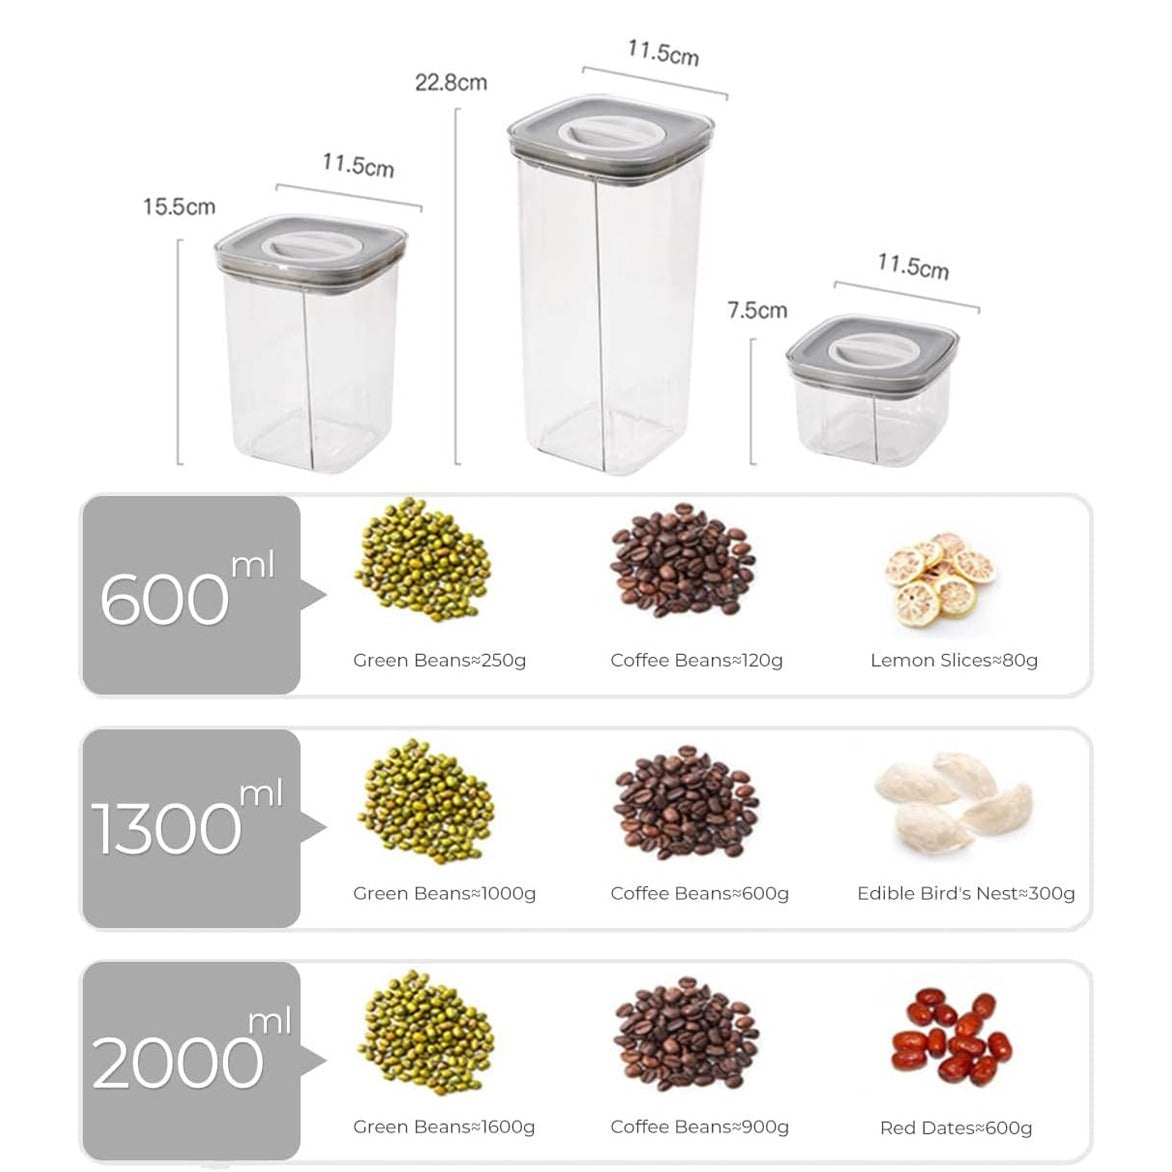 Airtight Cereal Storage Containers with its size